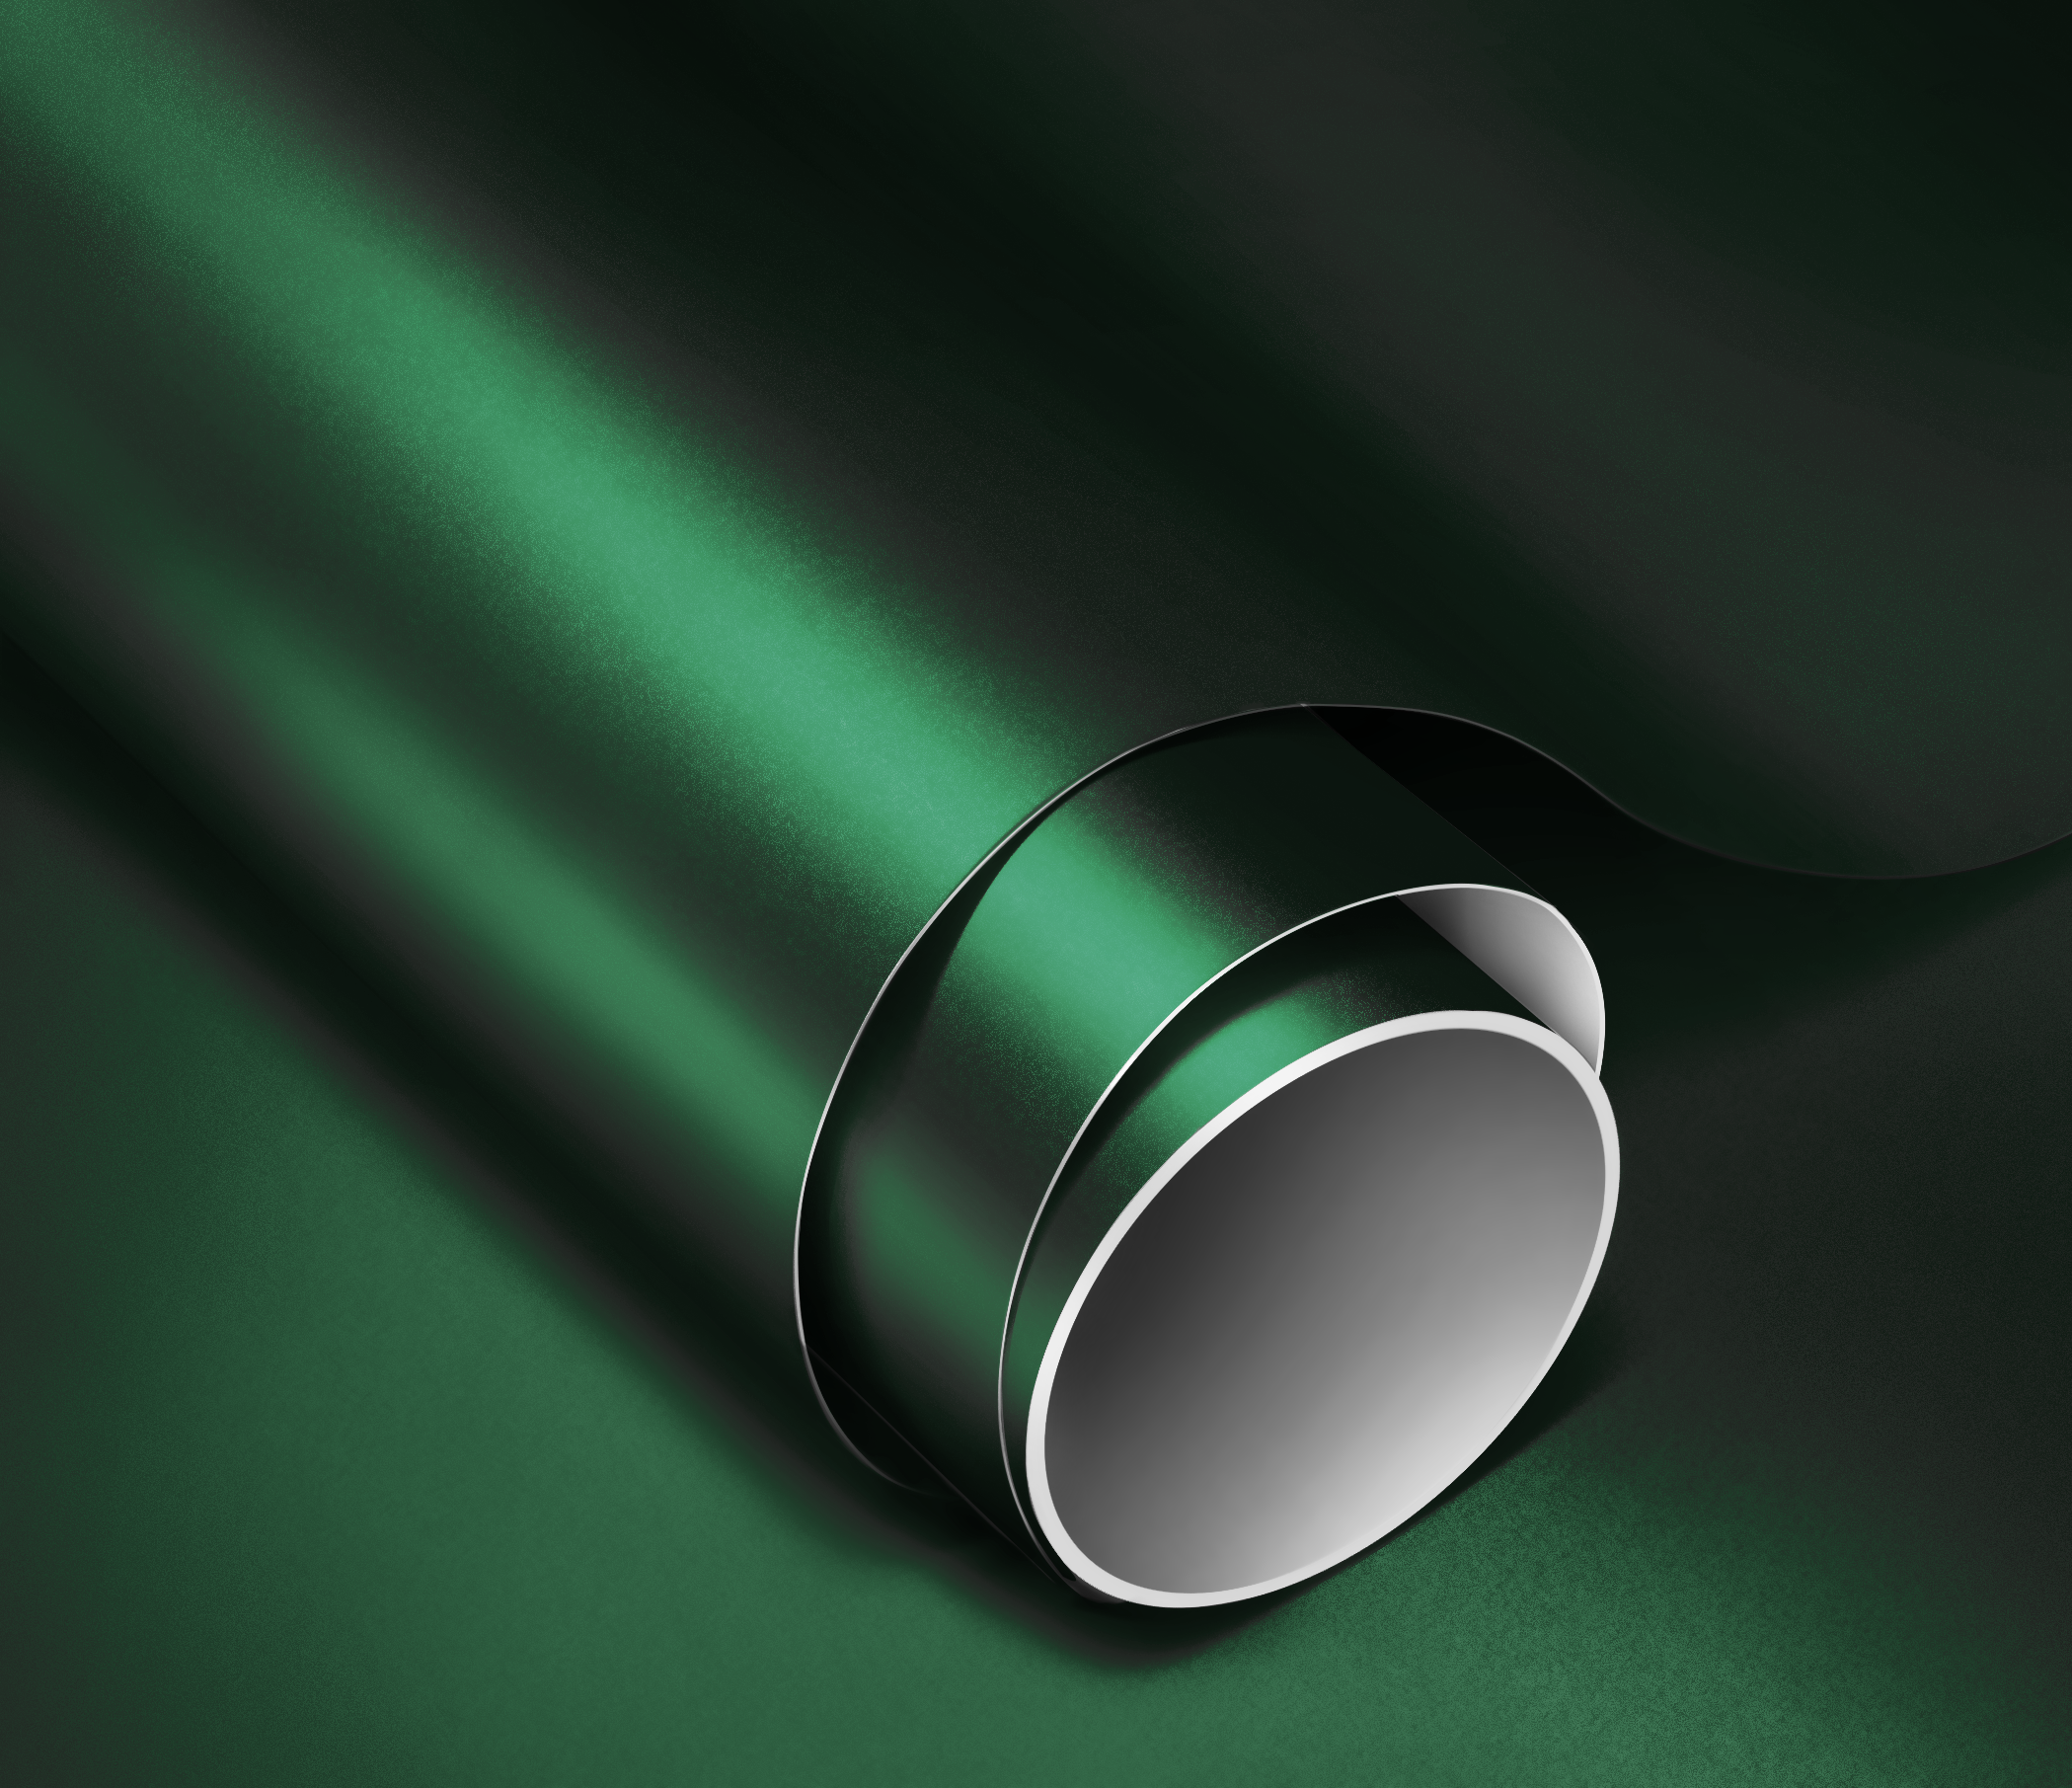 COLORFUSION® PPF - Stealth Chrome Green